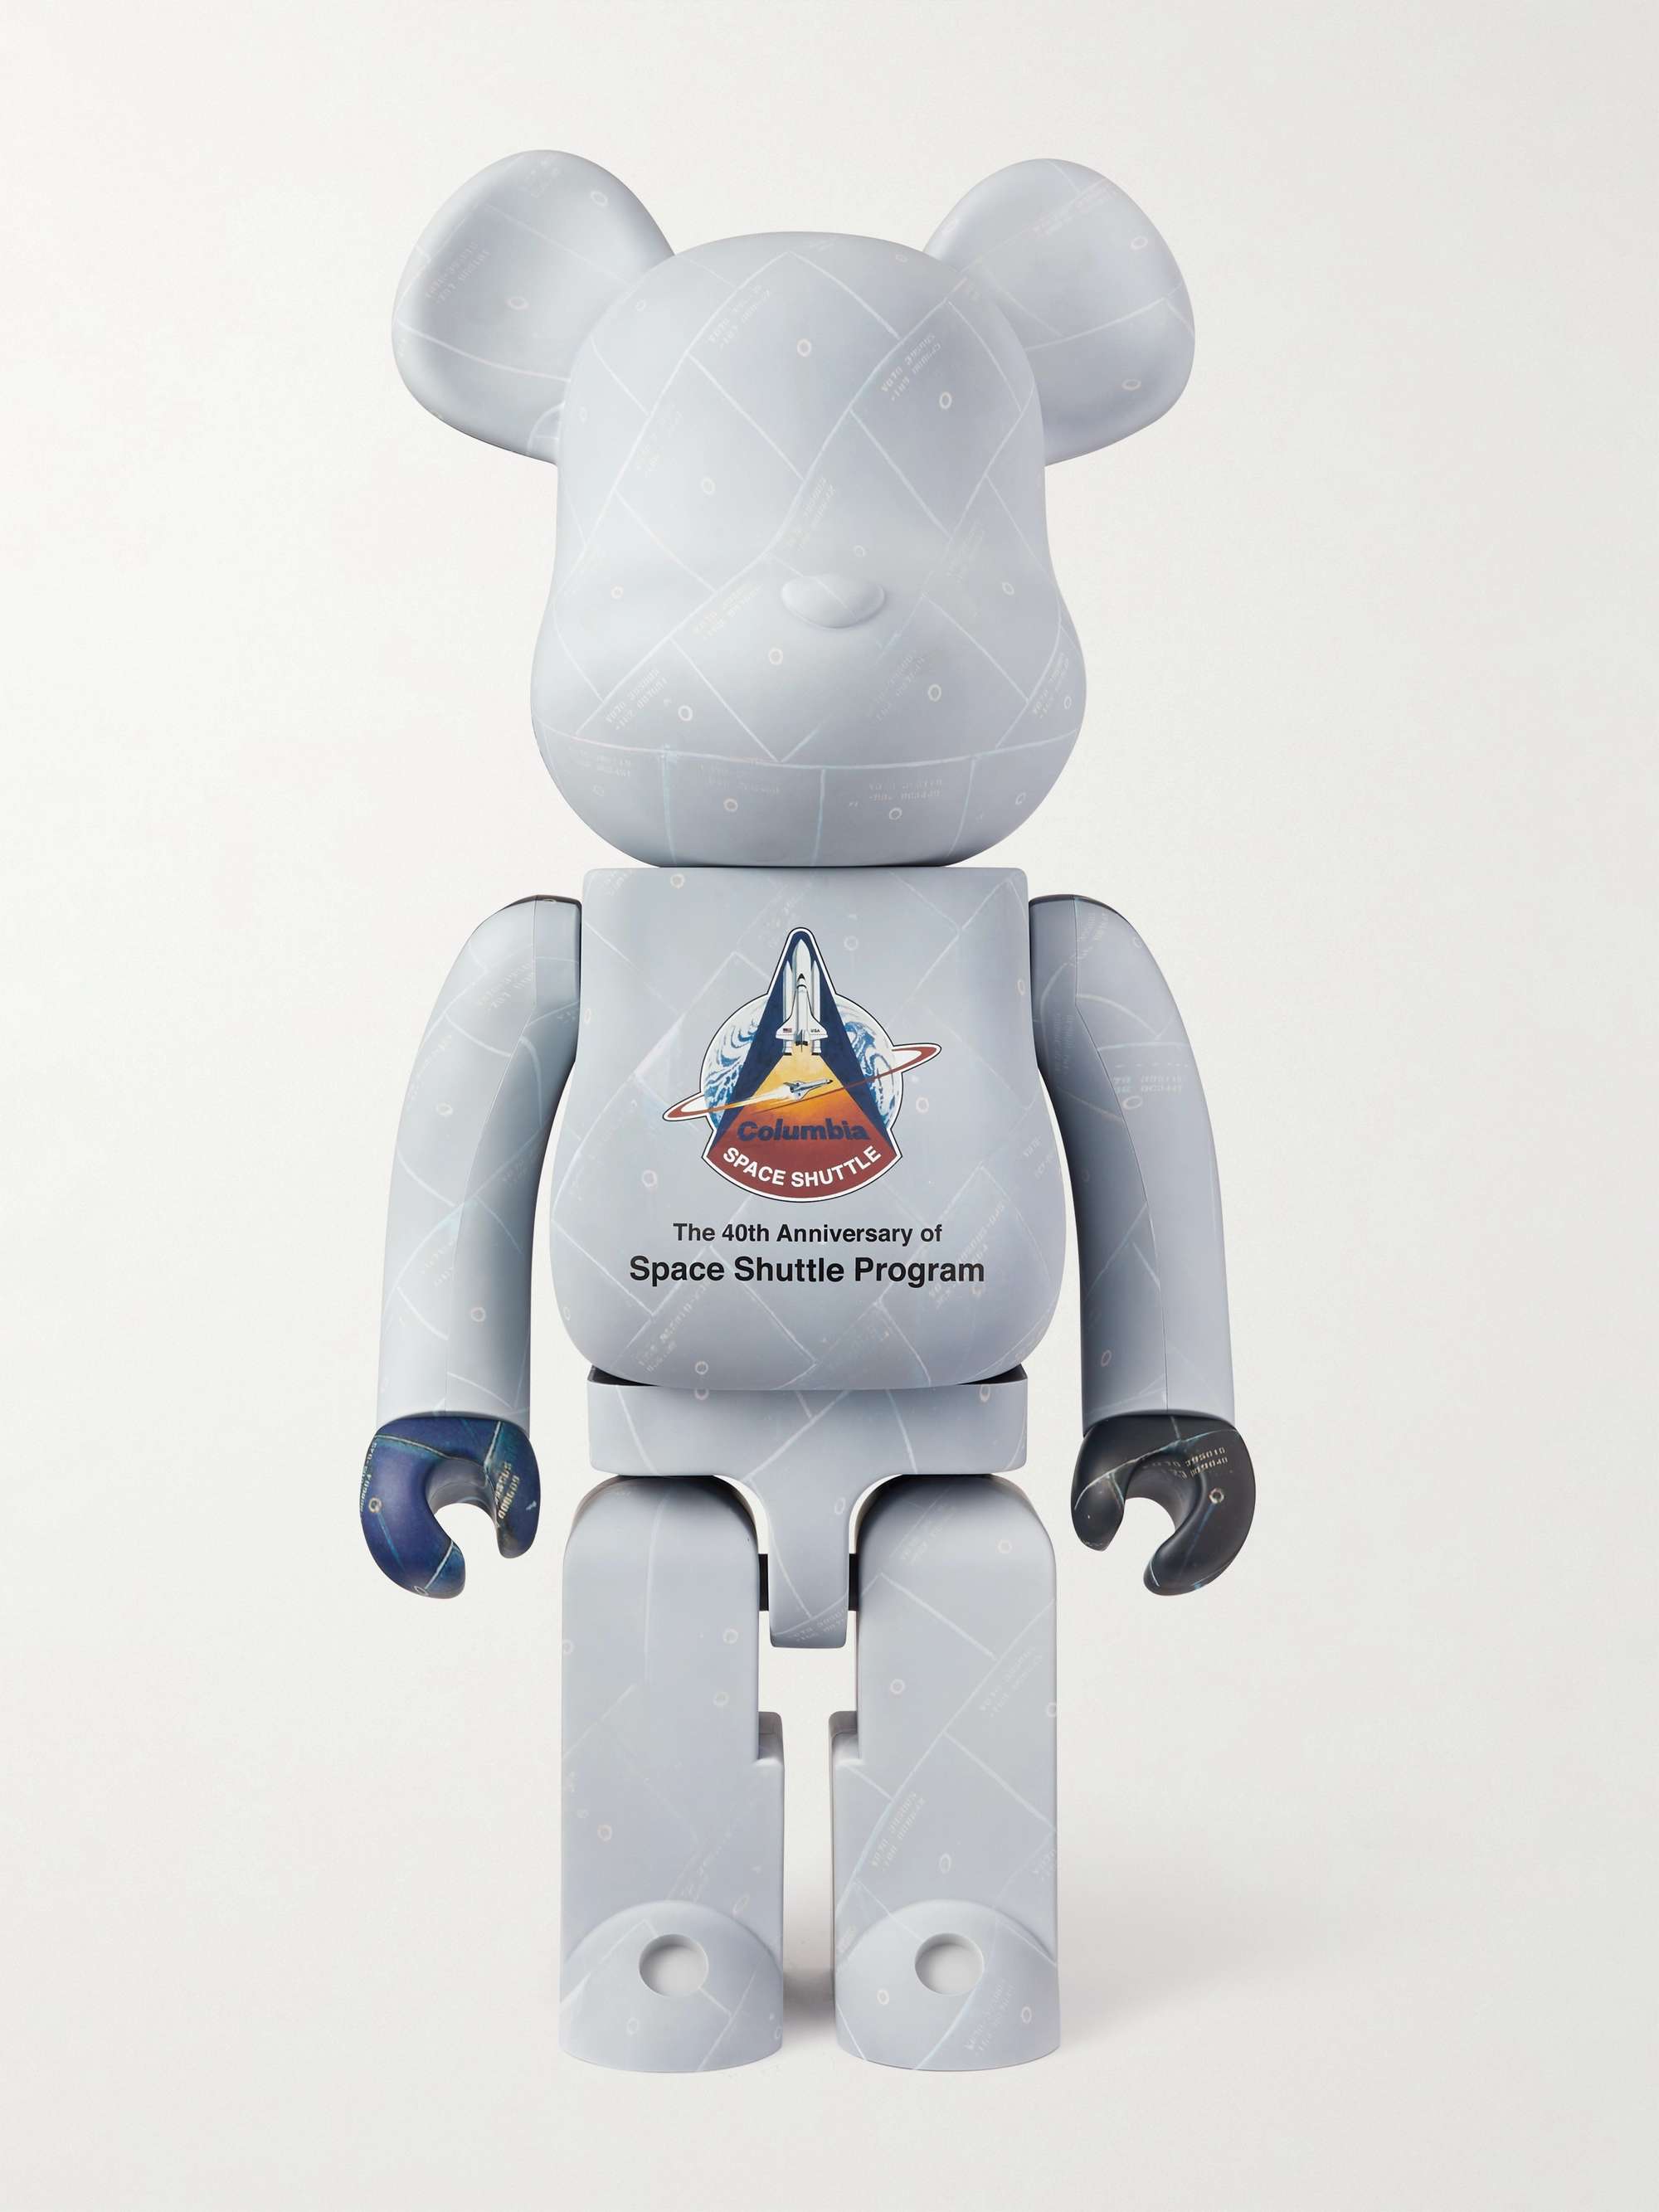 BE@RBRICK SPACE SHUTTLE 1000%